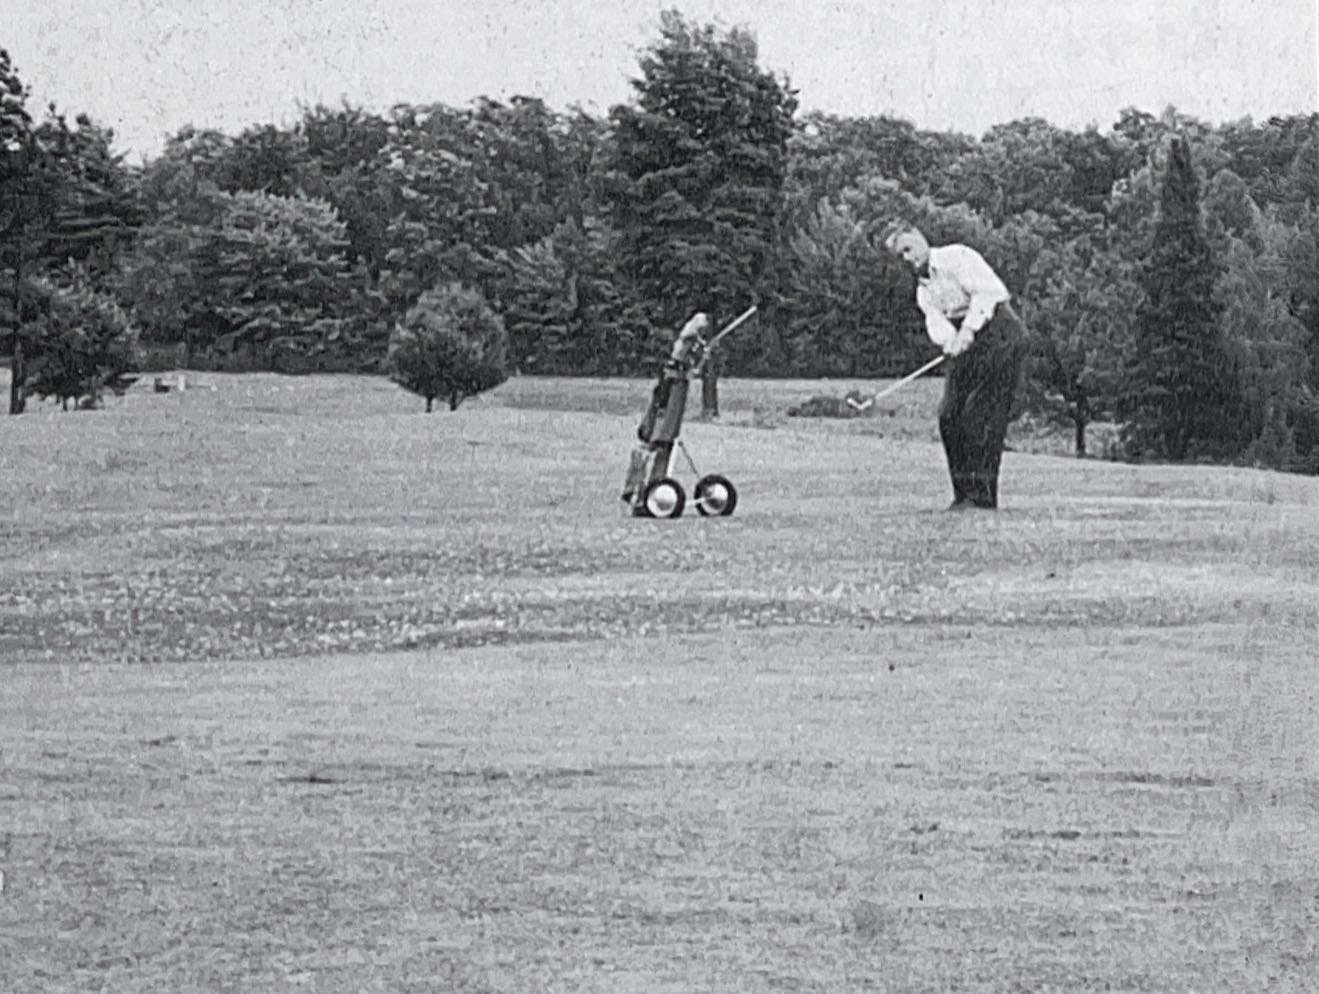 Ed Leeder and Drummond McCarroll in 1955. Ed Leeder was the first owner and built the north course in the early 1950s!

What hole do you think they’re playing?